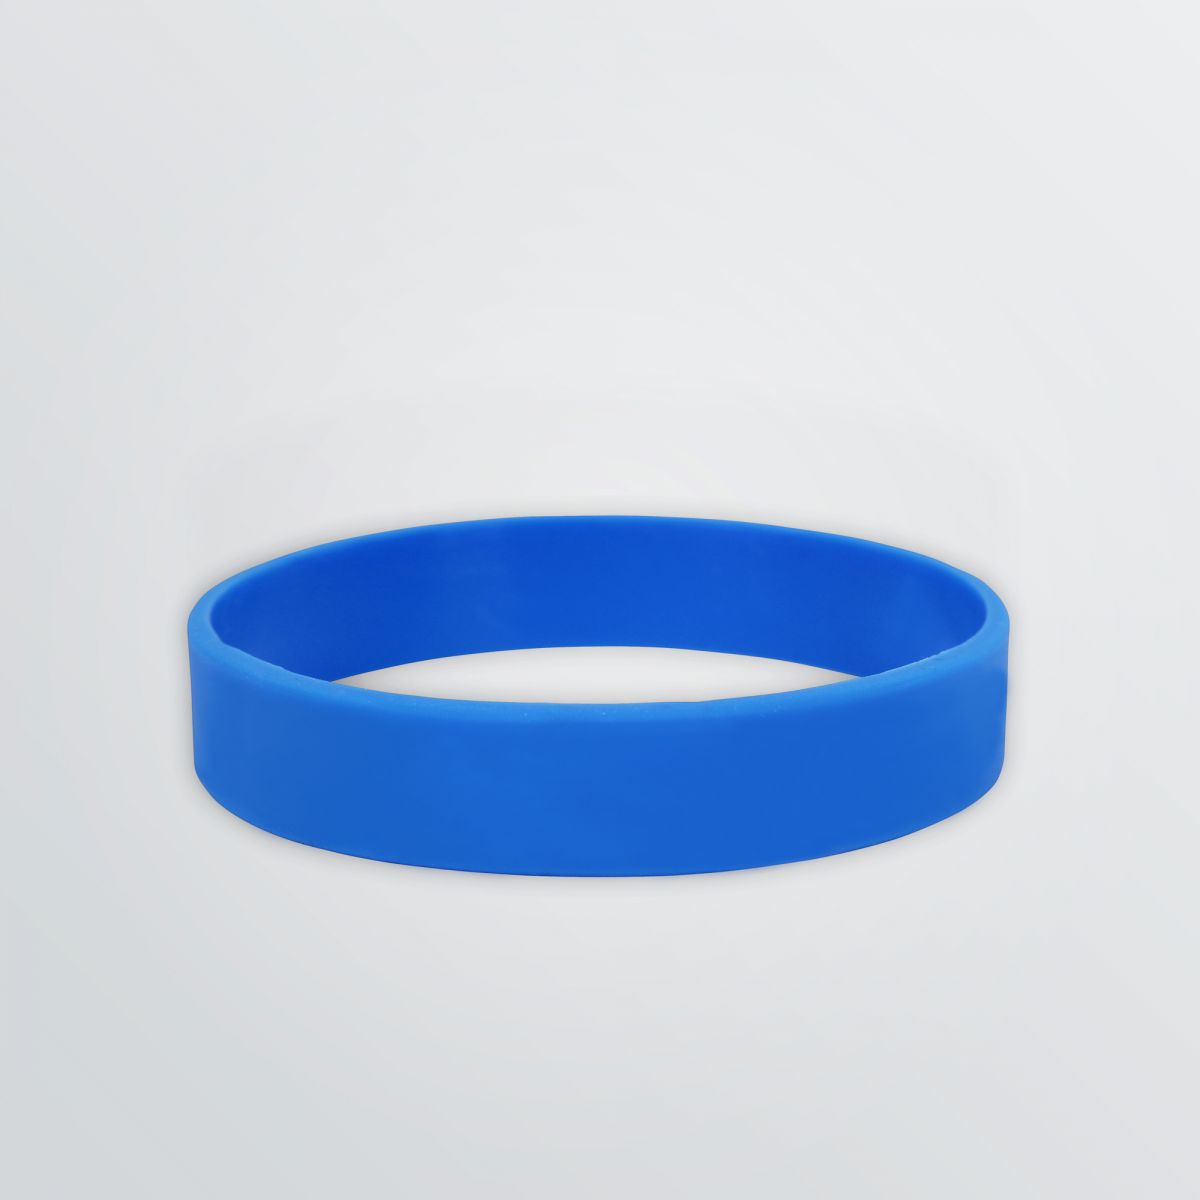 customisable silicone wristband in blue colour